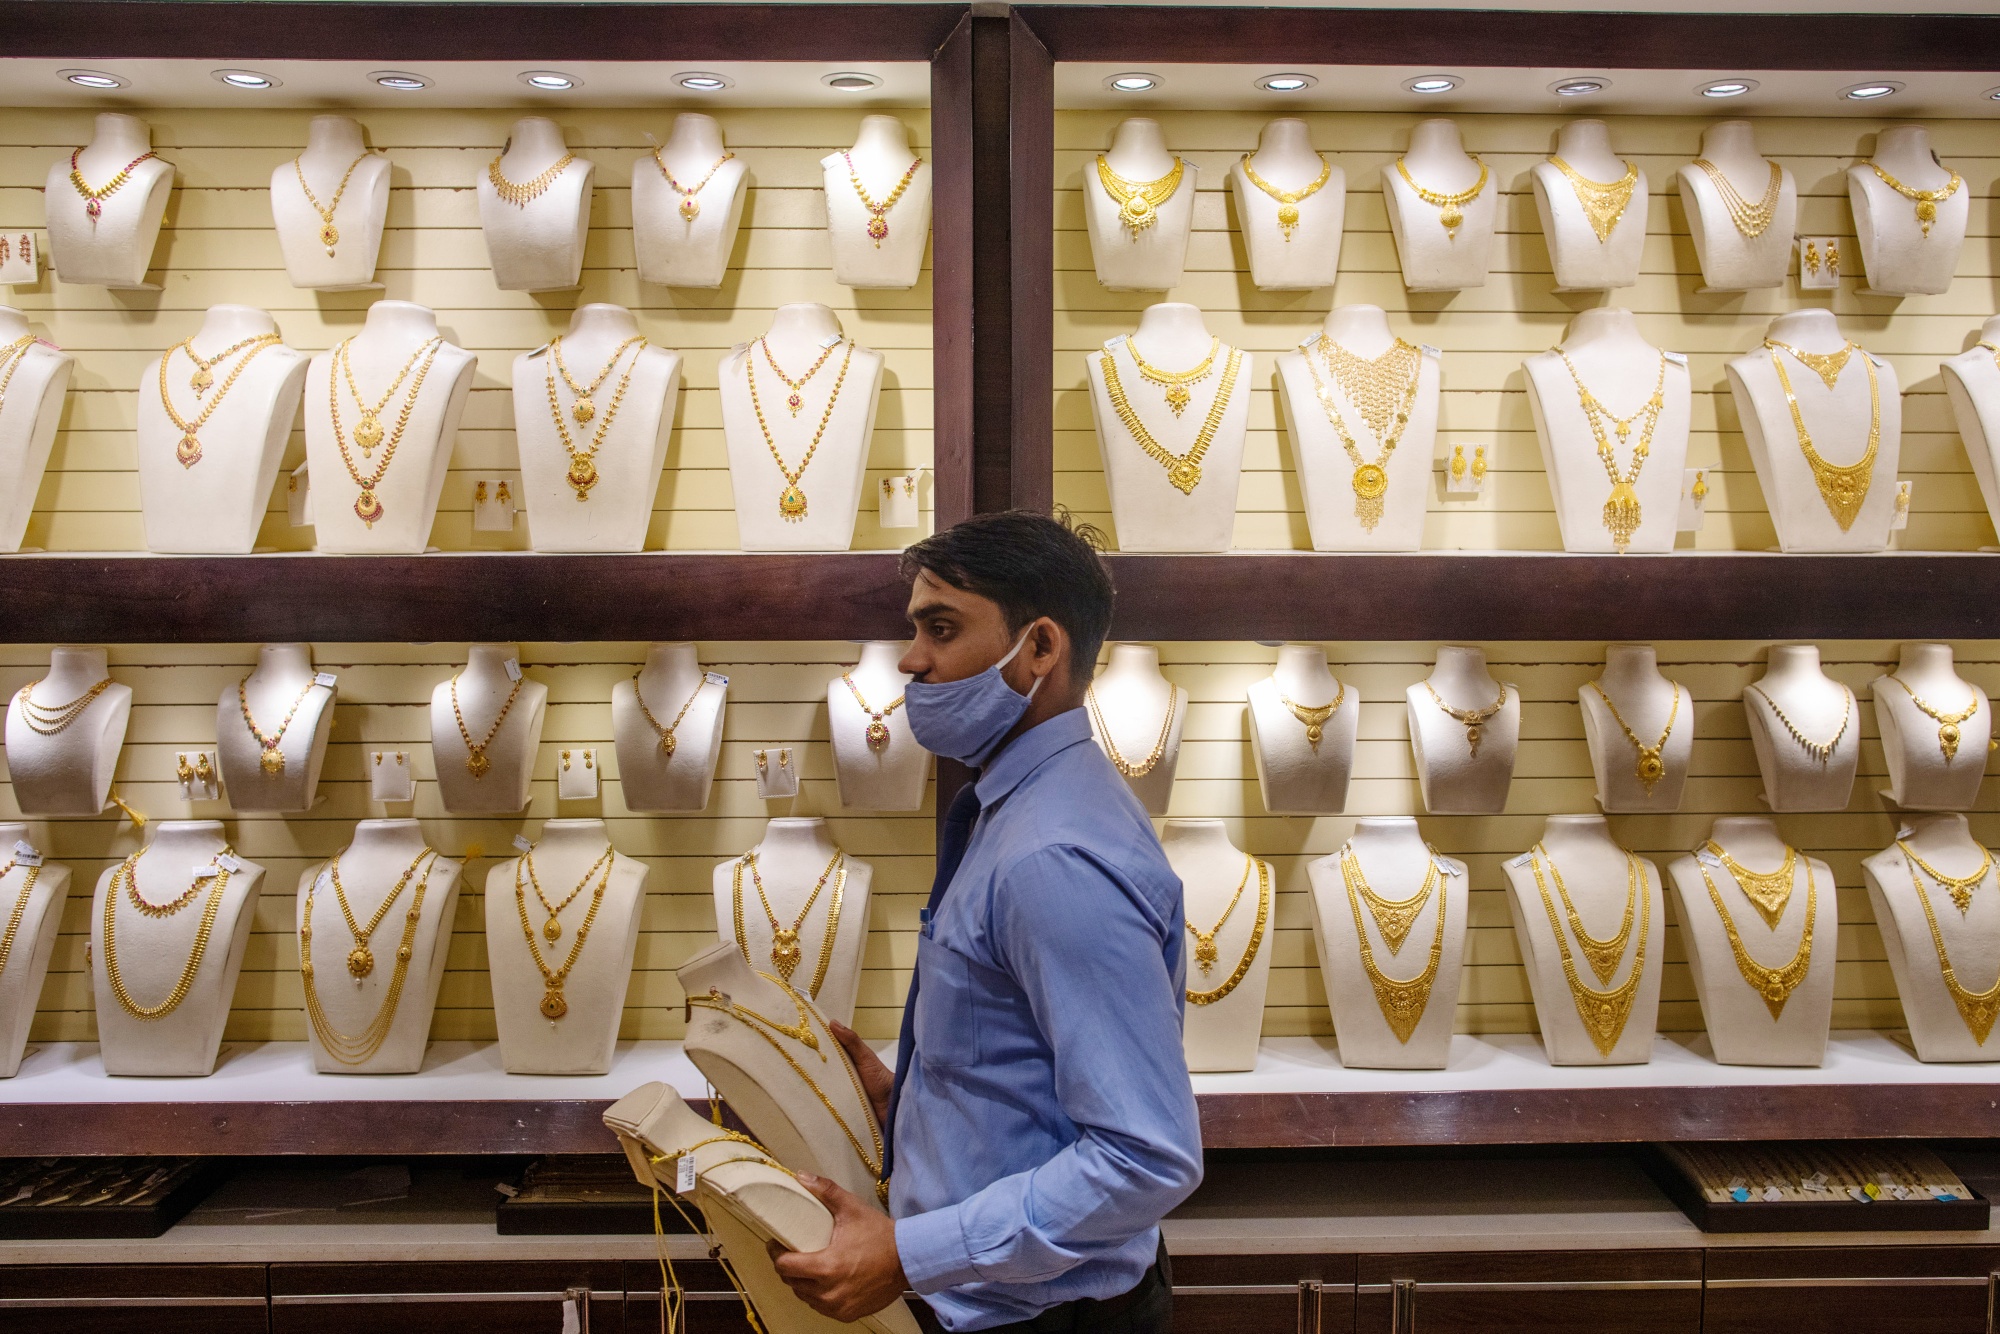 Gold necklaces inside a store in Noida, India.